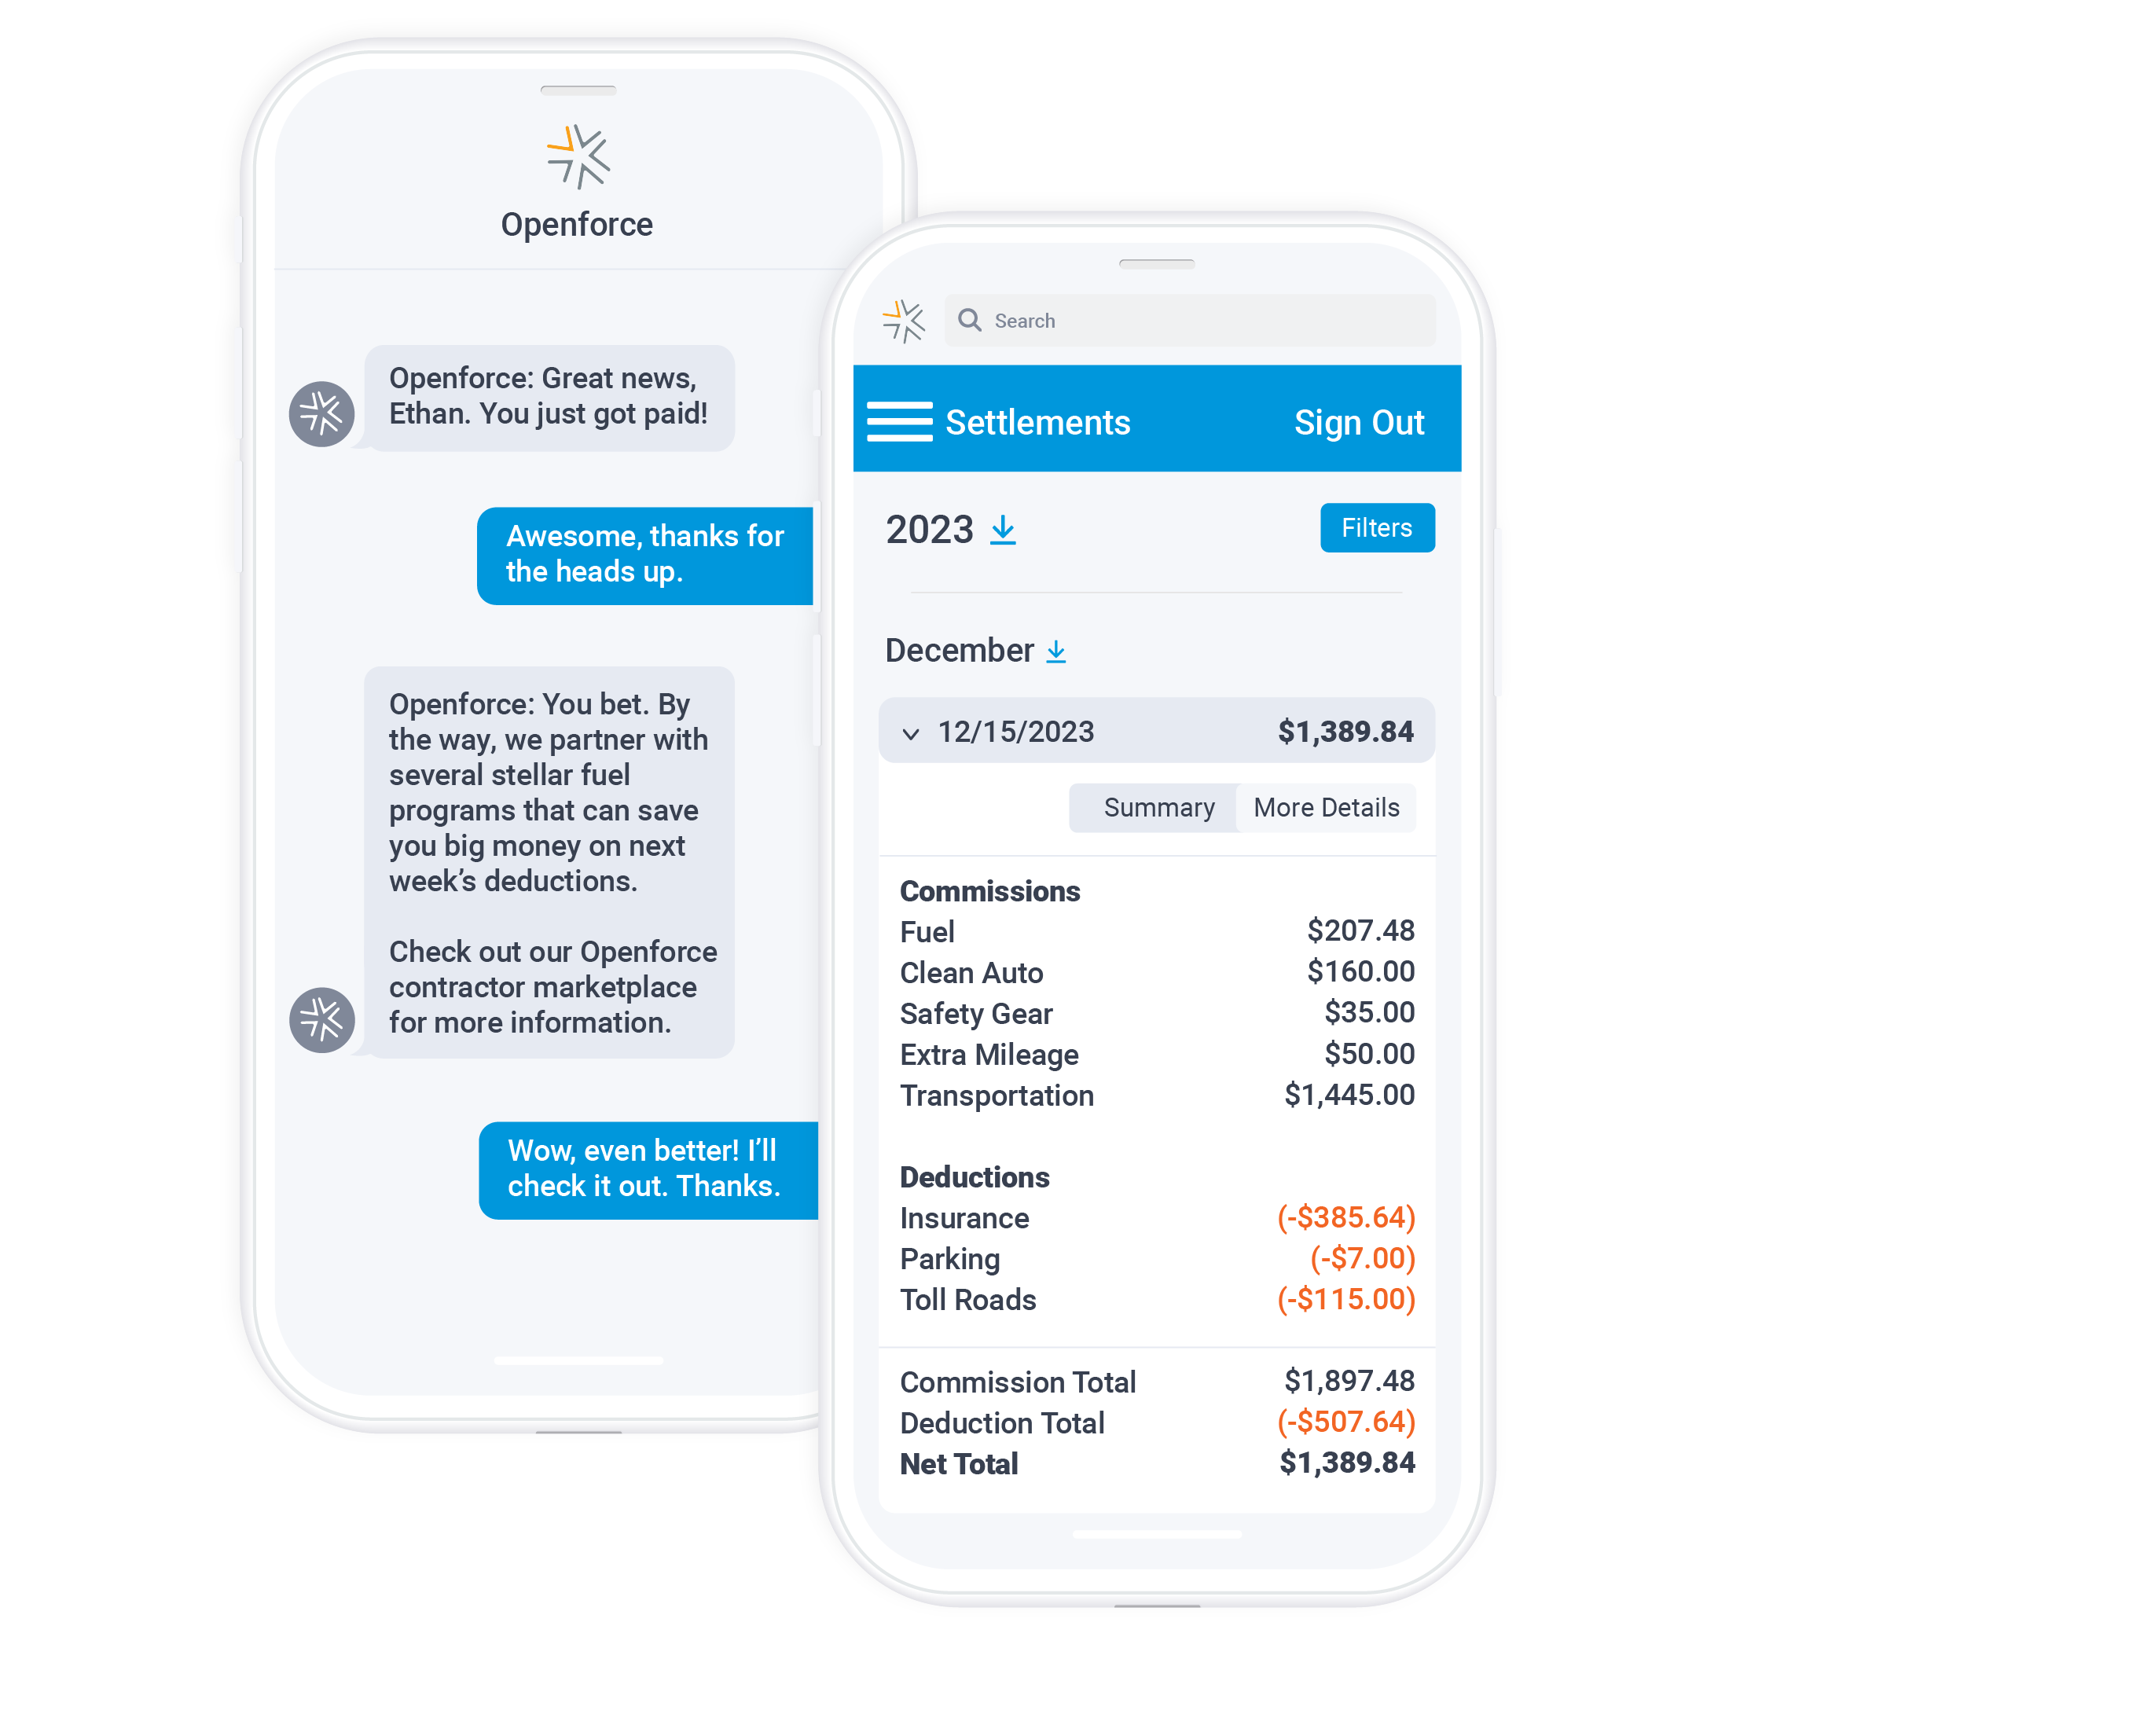 Managing contractor payments in-house is time consuming and risky. Save time while reducing risk with Openforce’s full-service payment platform. We'll even send contractor a handy text when payments are on the way!